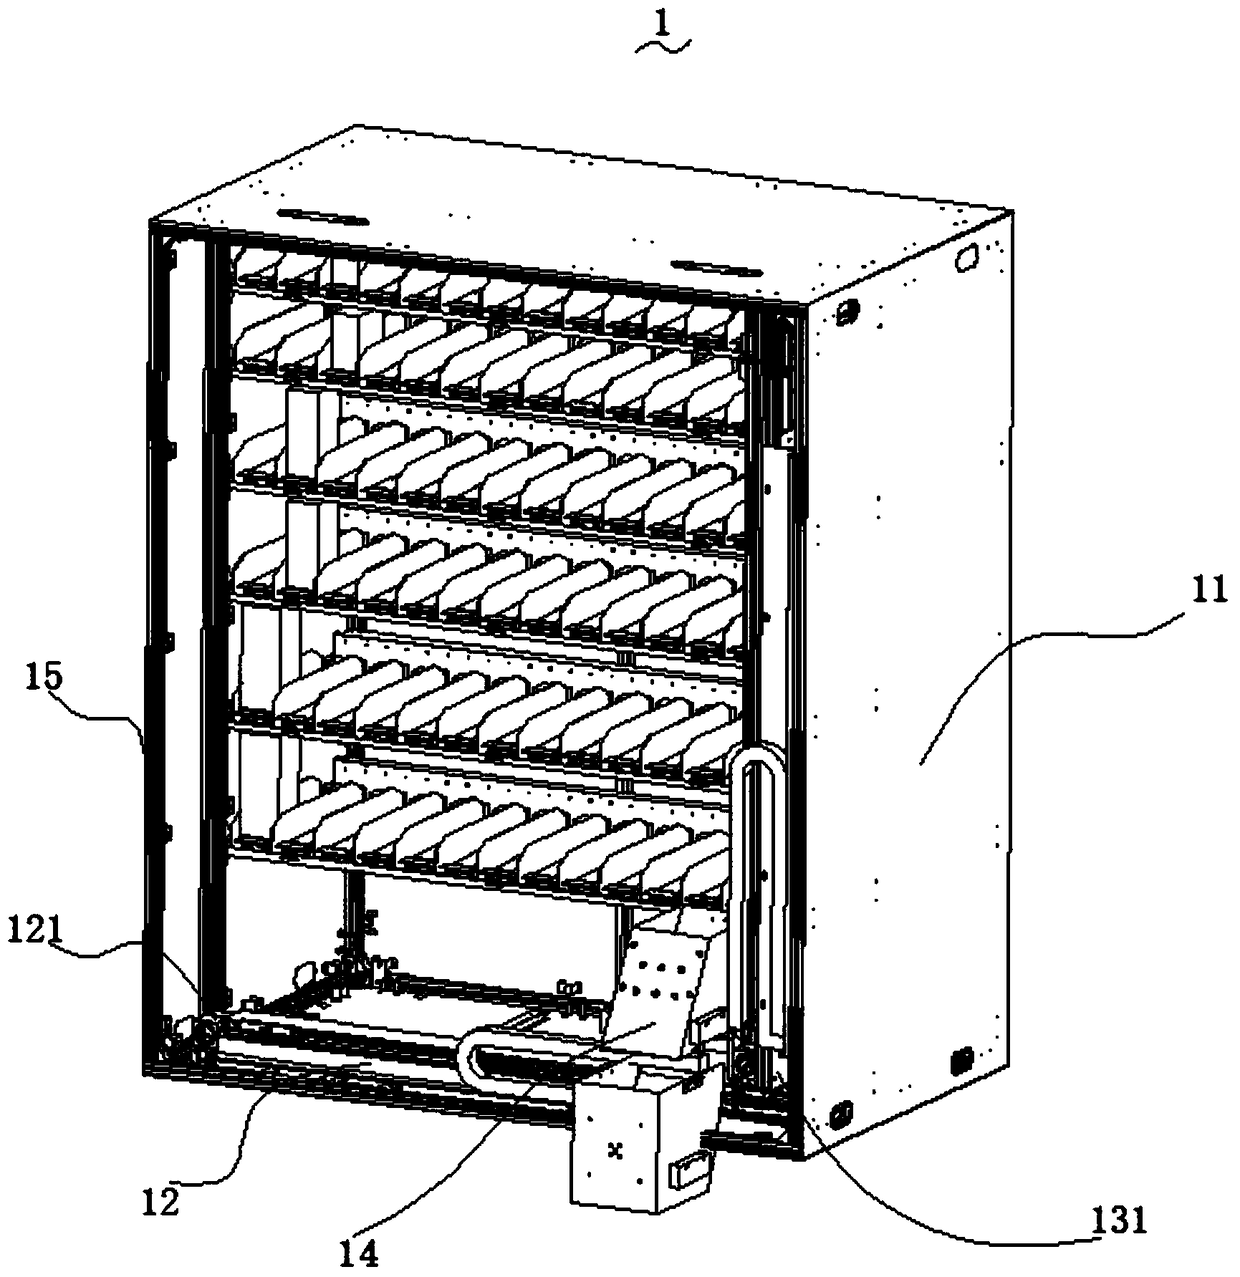 Intelligent goods shelf provided with X-Y axis